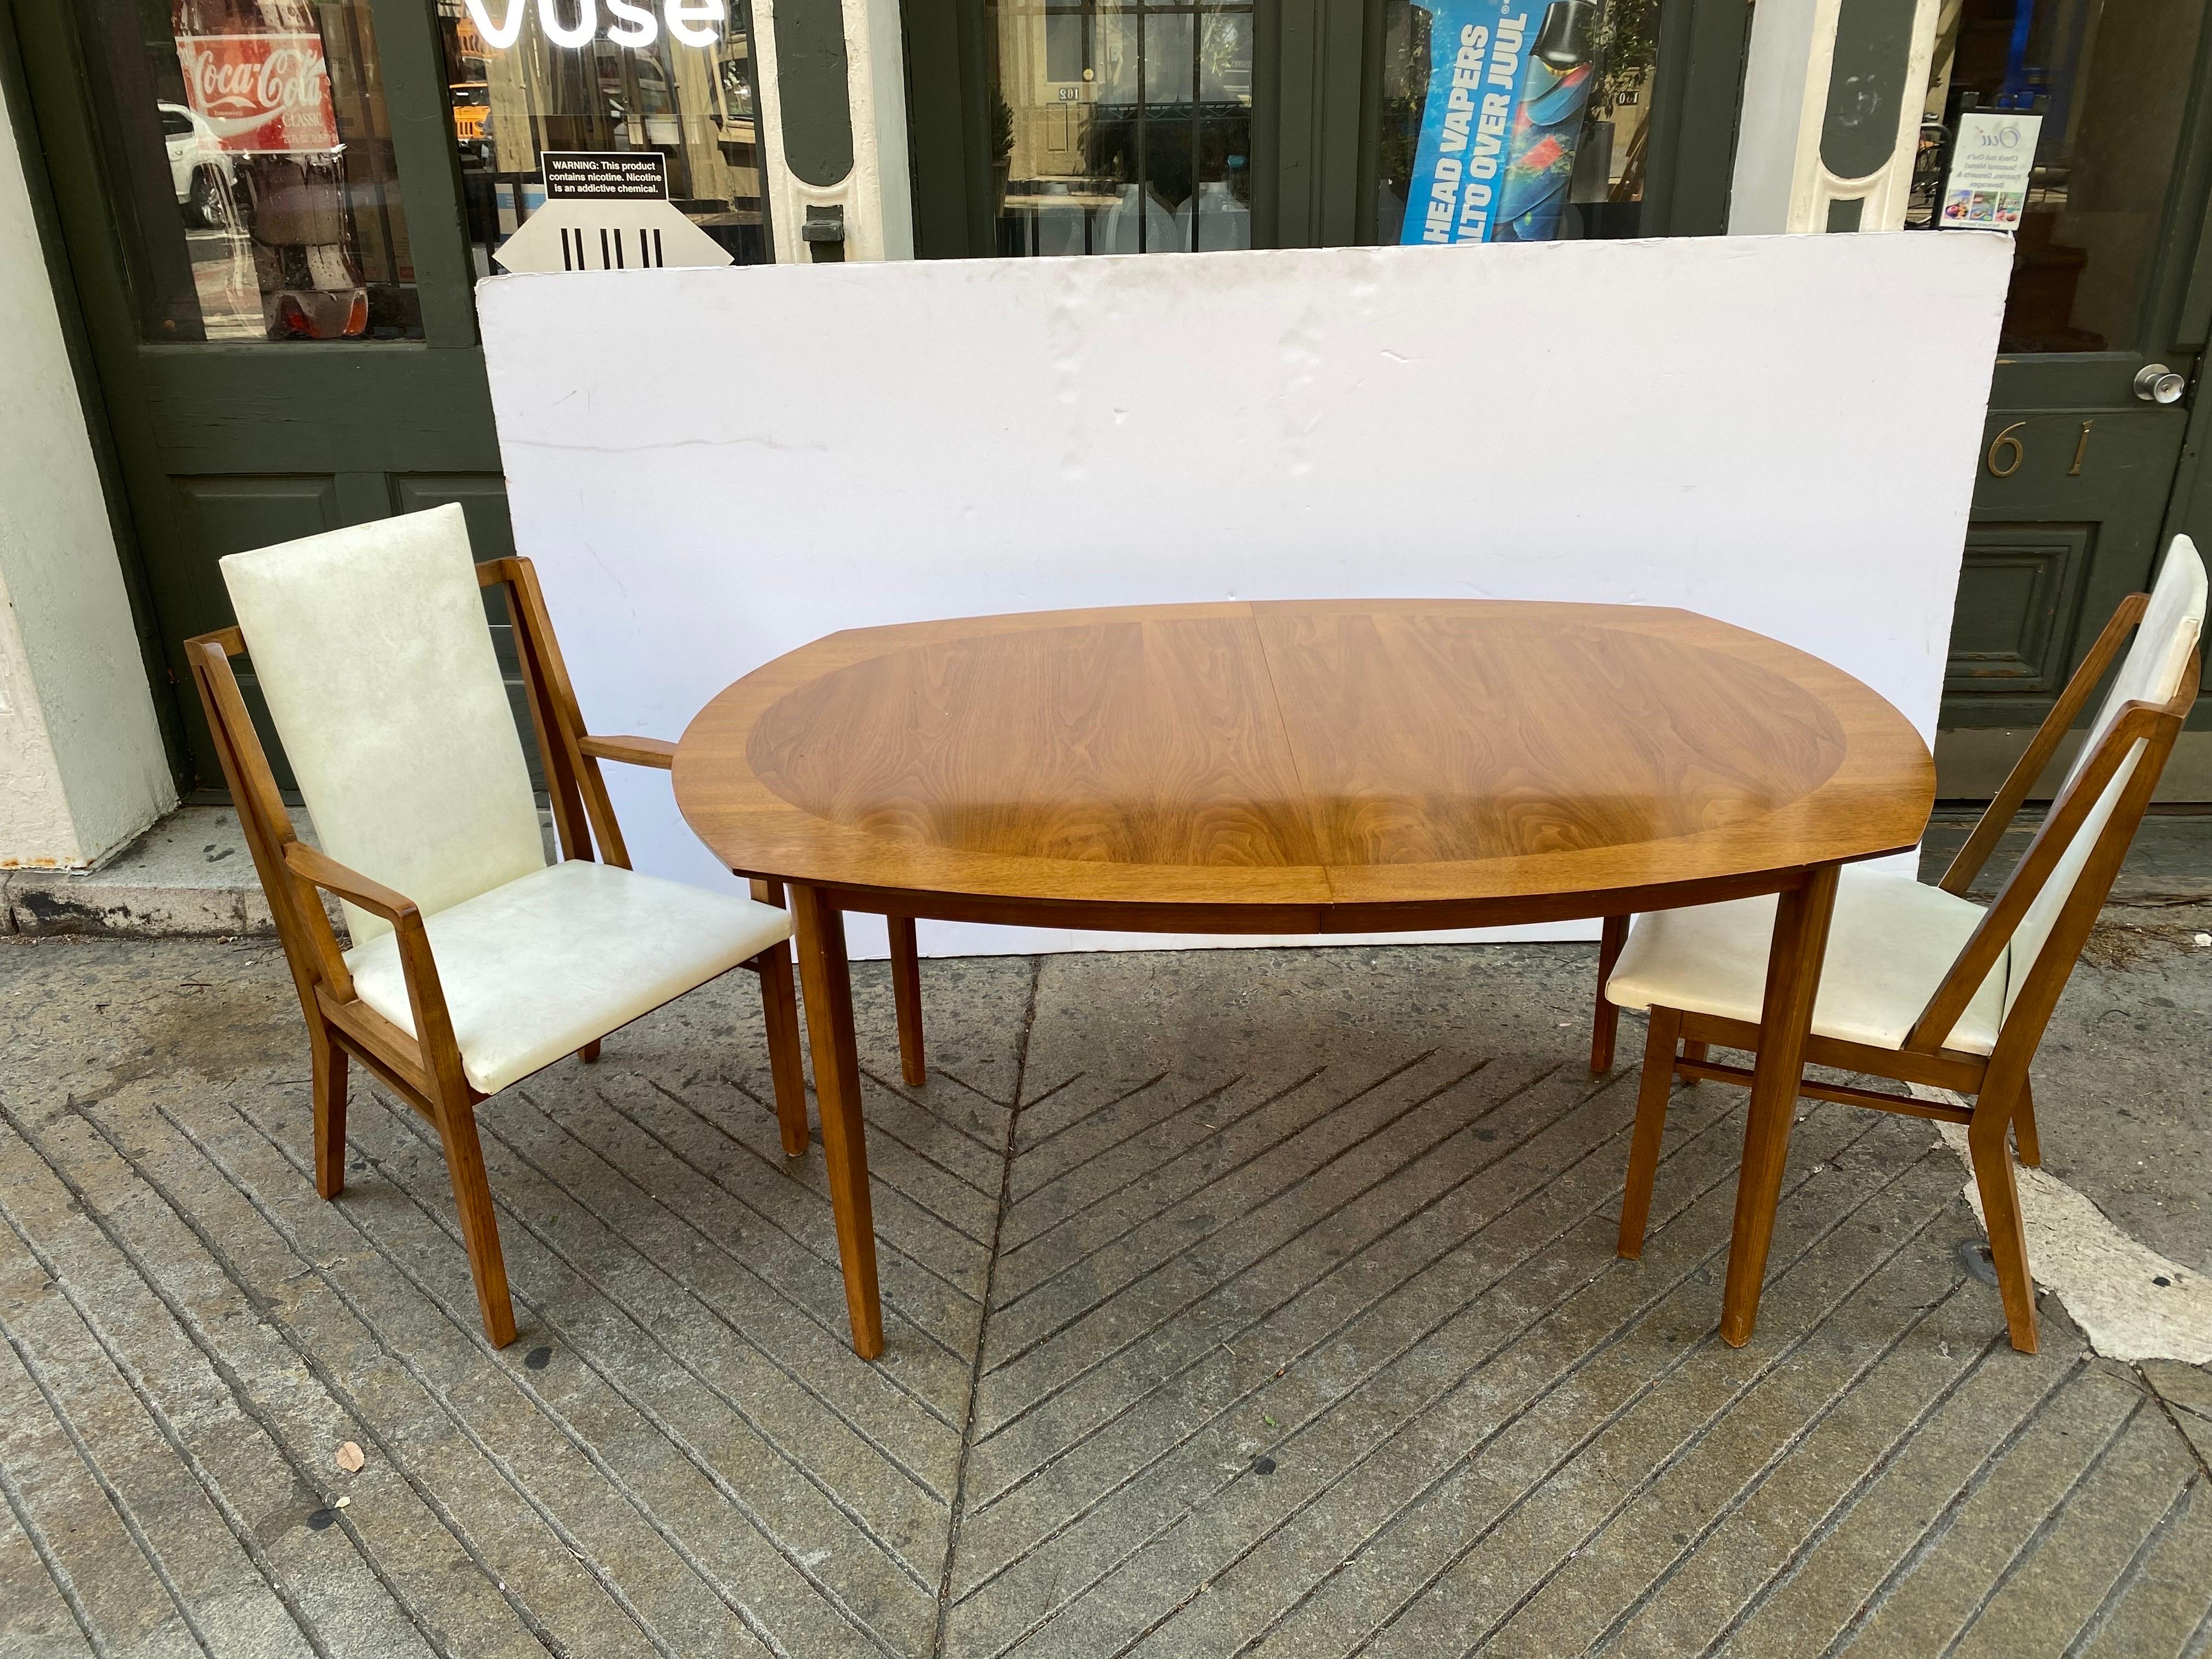 Drexel Design for Living Table and 6 Chairs 10